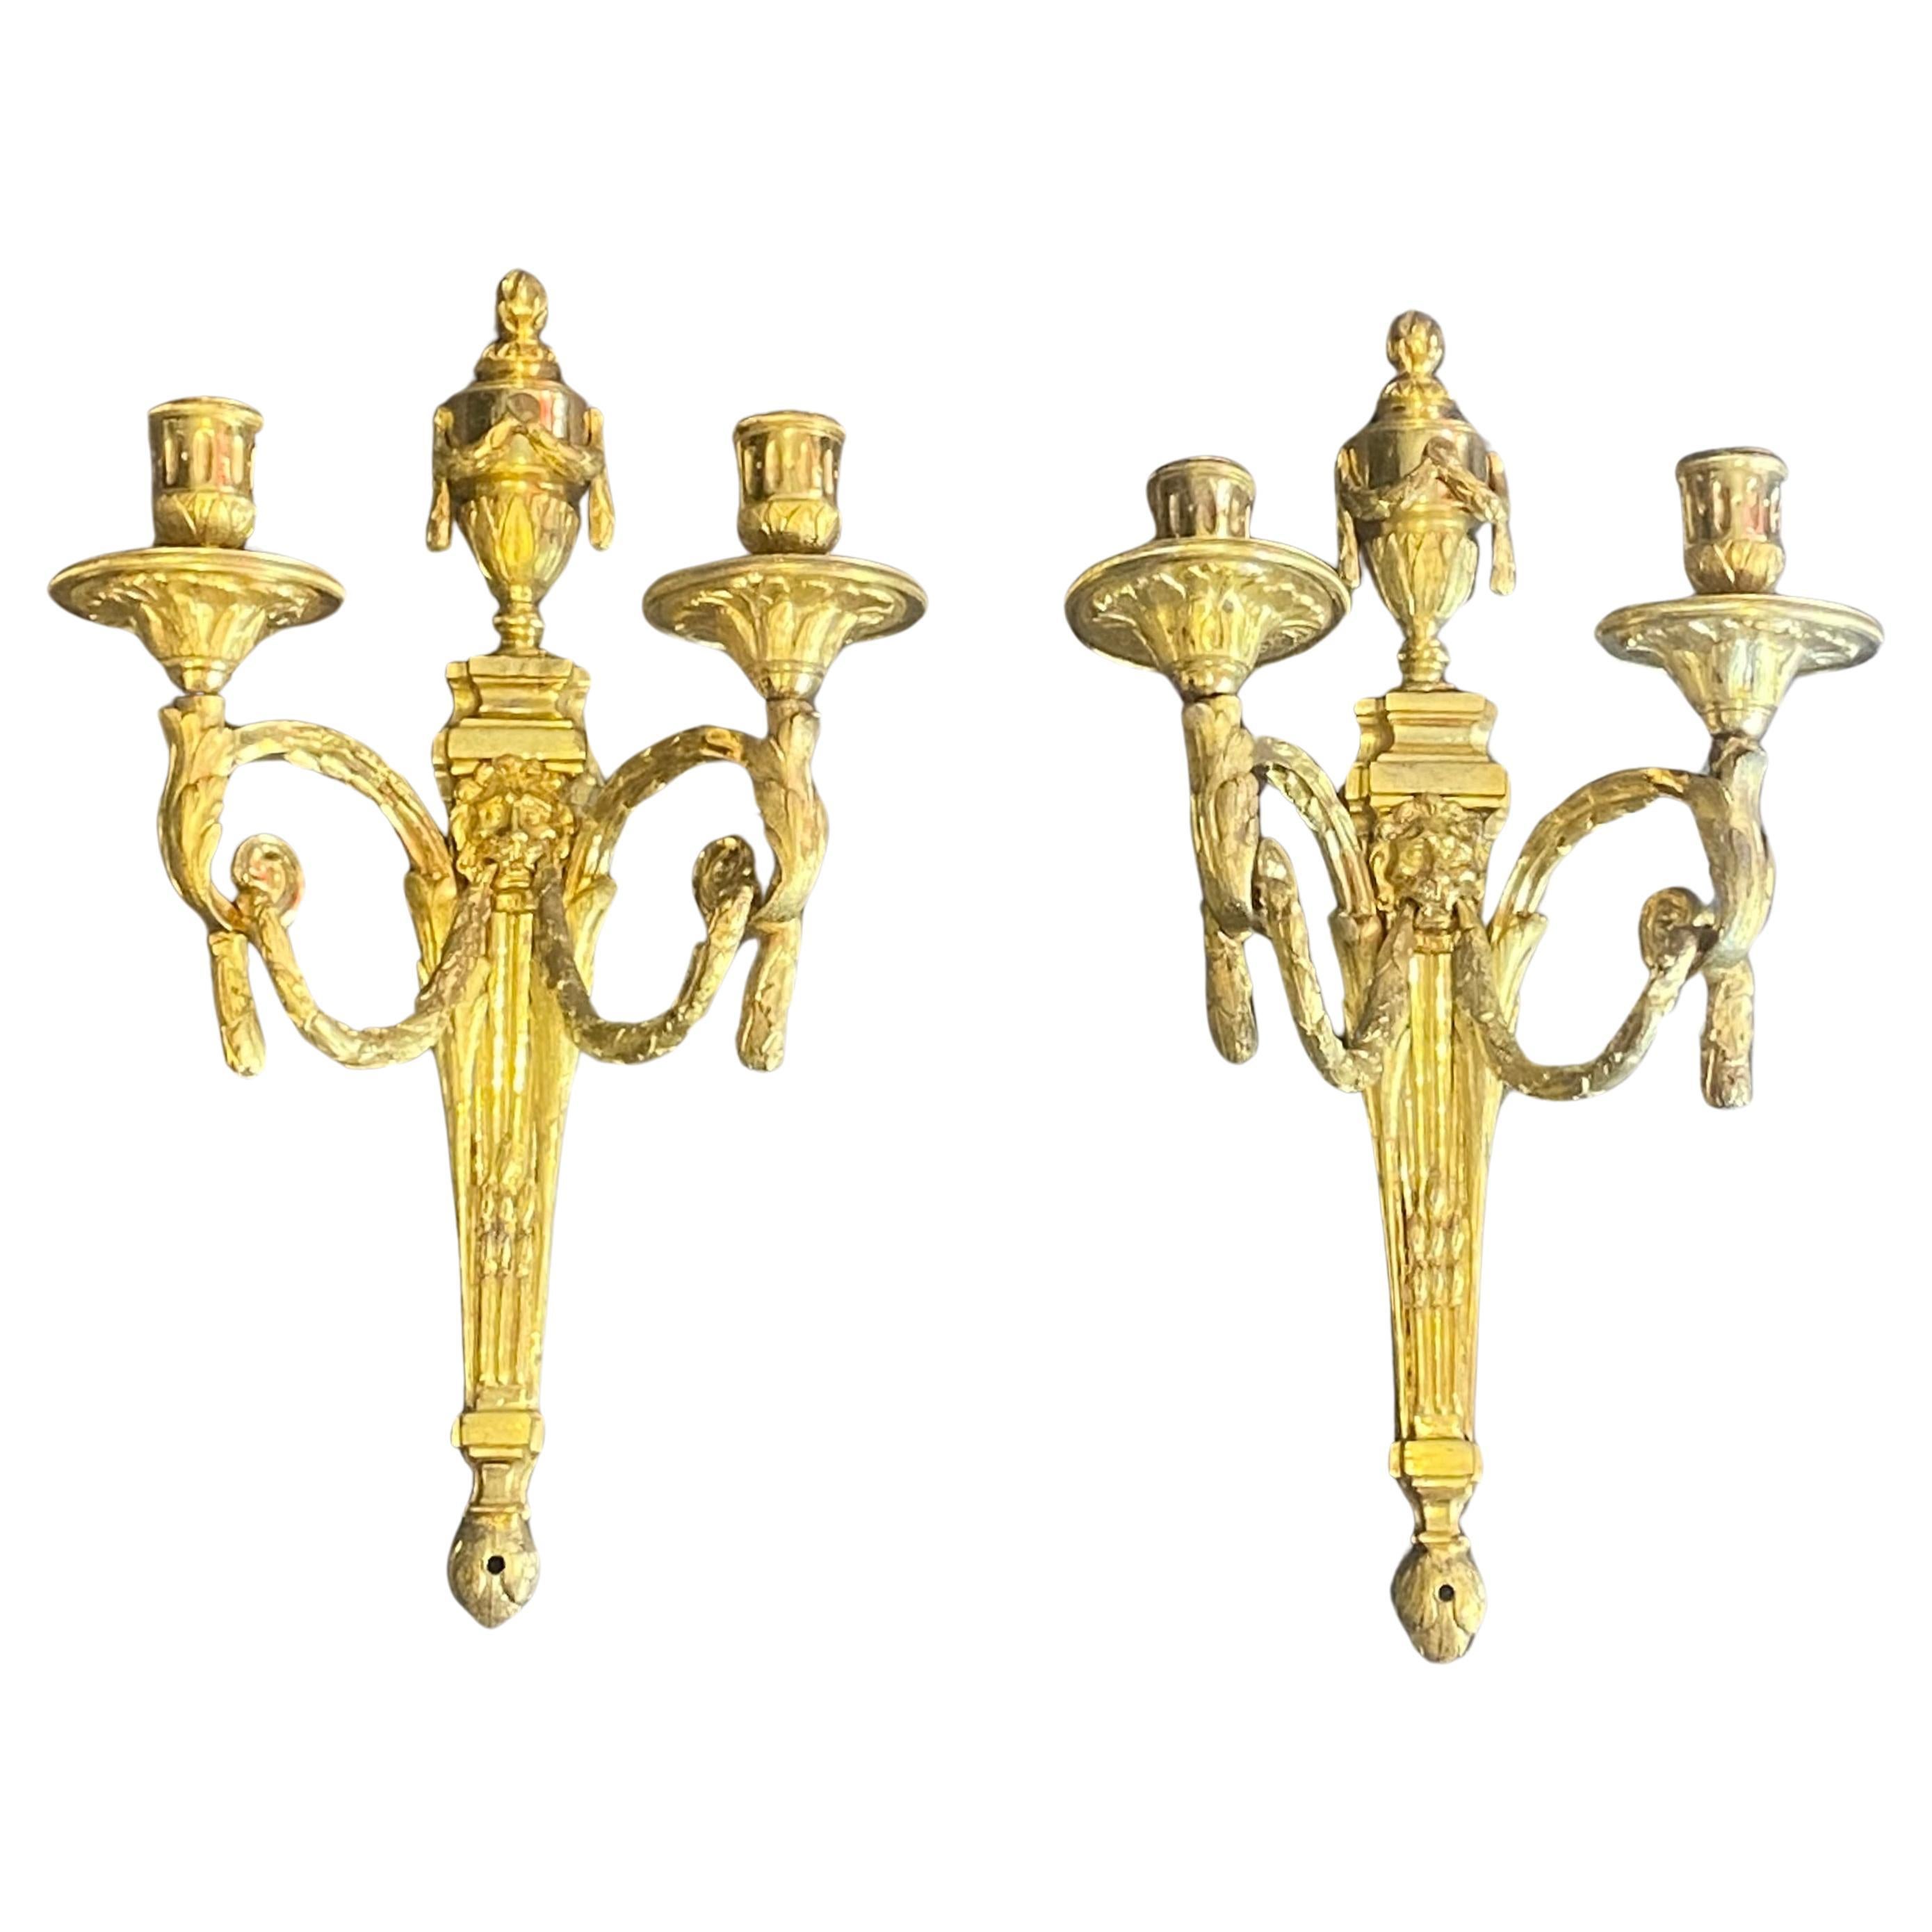 Pair Of Wall Lamps - Gilt Bronze - France - 19th Century